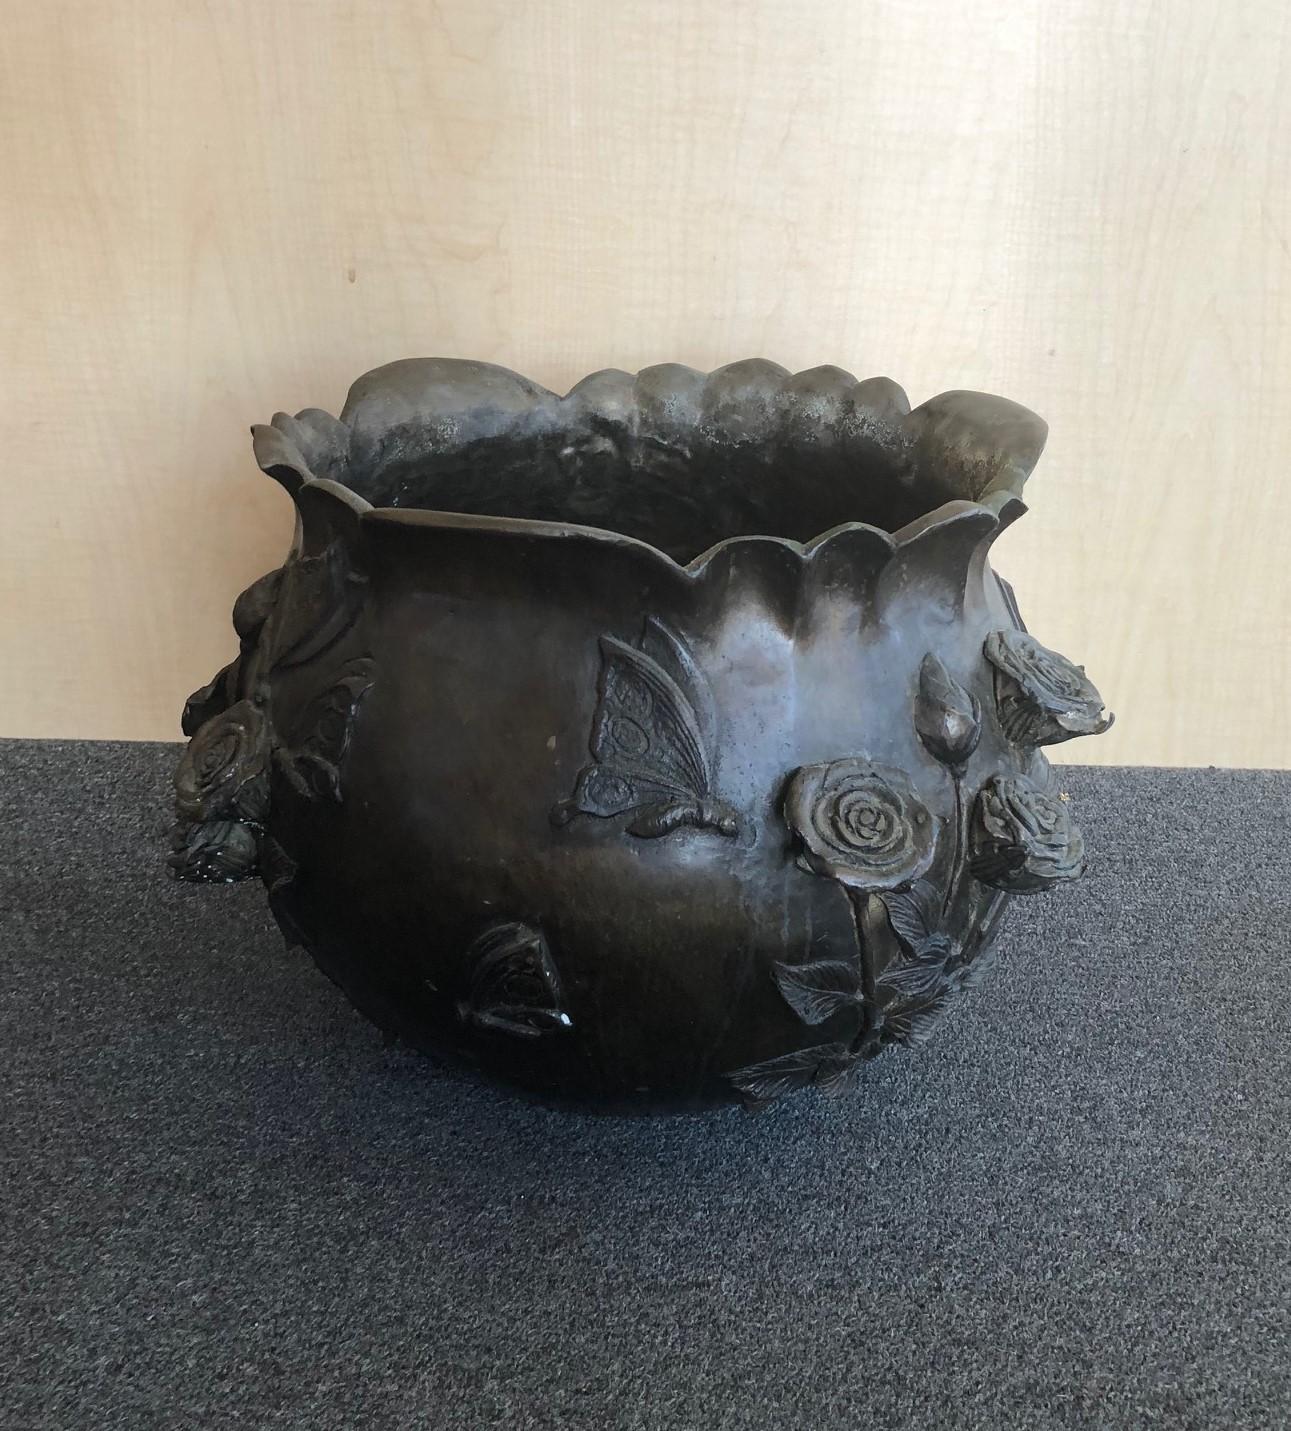 A very nice pair of large bronze planters or jardinières with a bas relief floral motif, circa 1950s. The planters are very heavy and have a wonderful patina. They measure 16